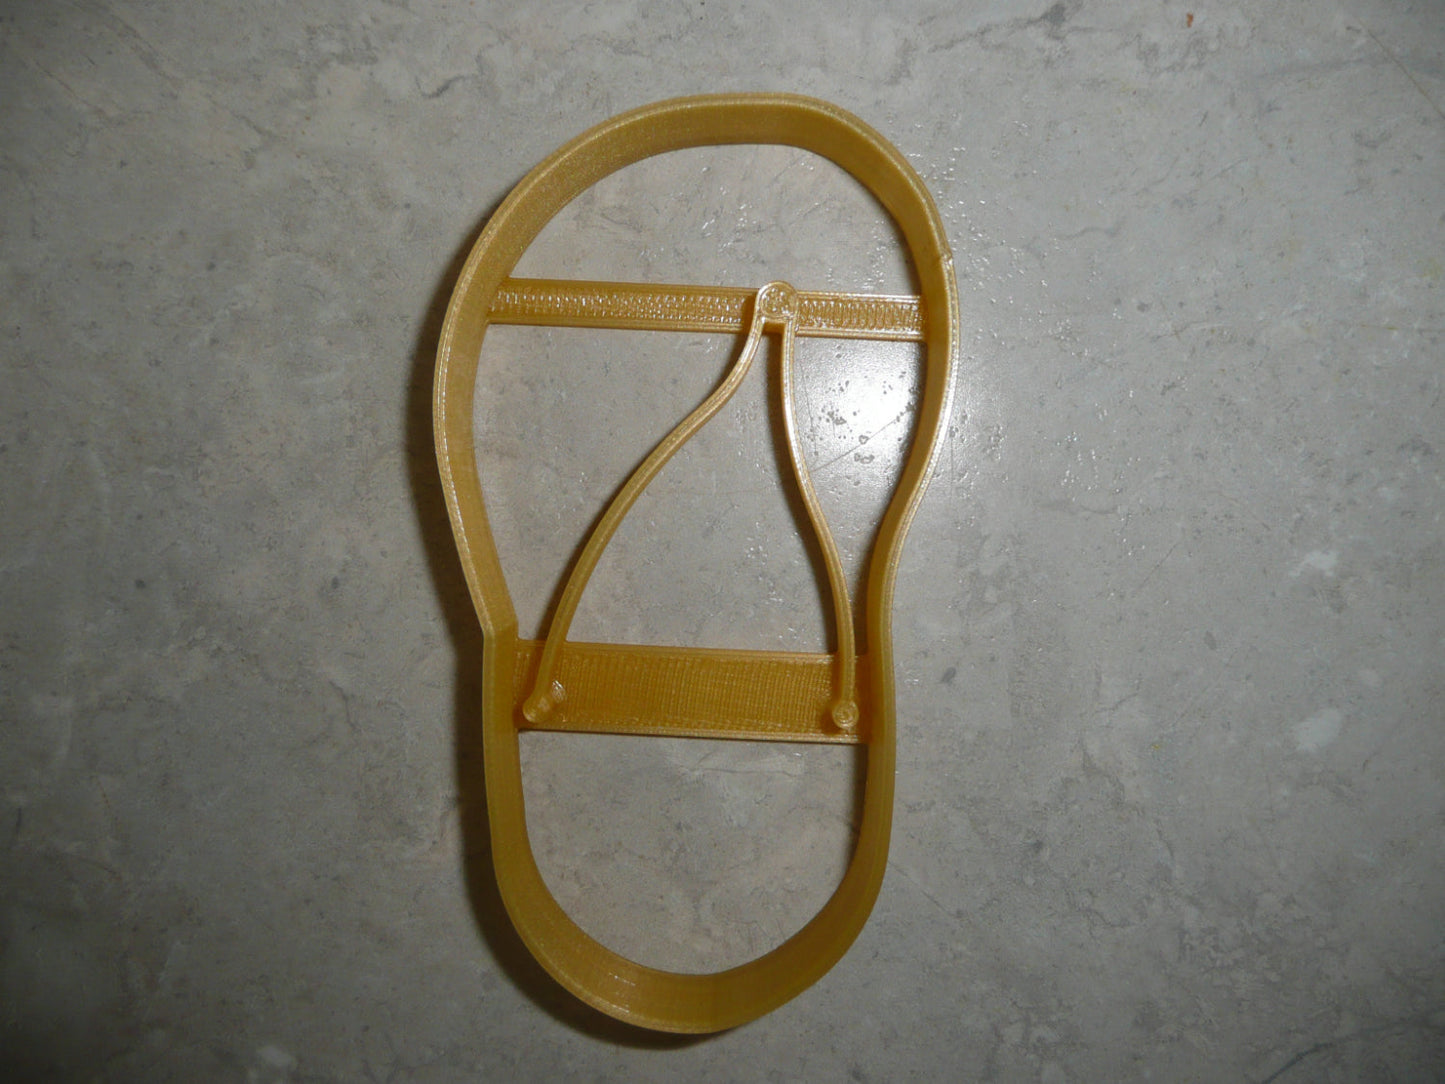 Flip Flop Sandals Left And Right Feet Set Of 2 Cookie Cutters Made In USA PR1794